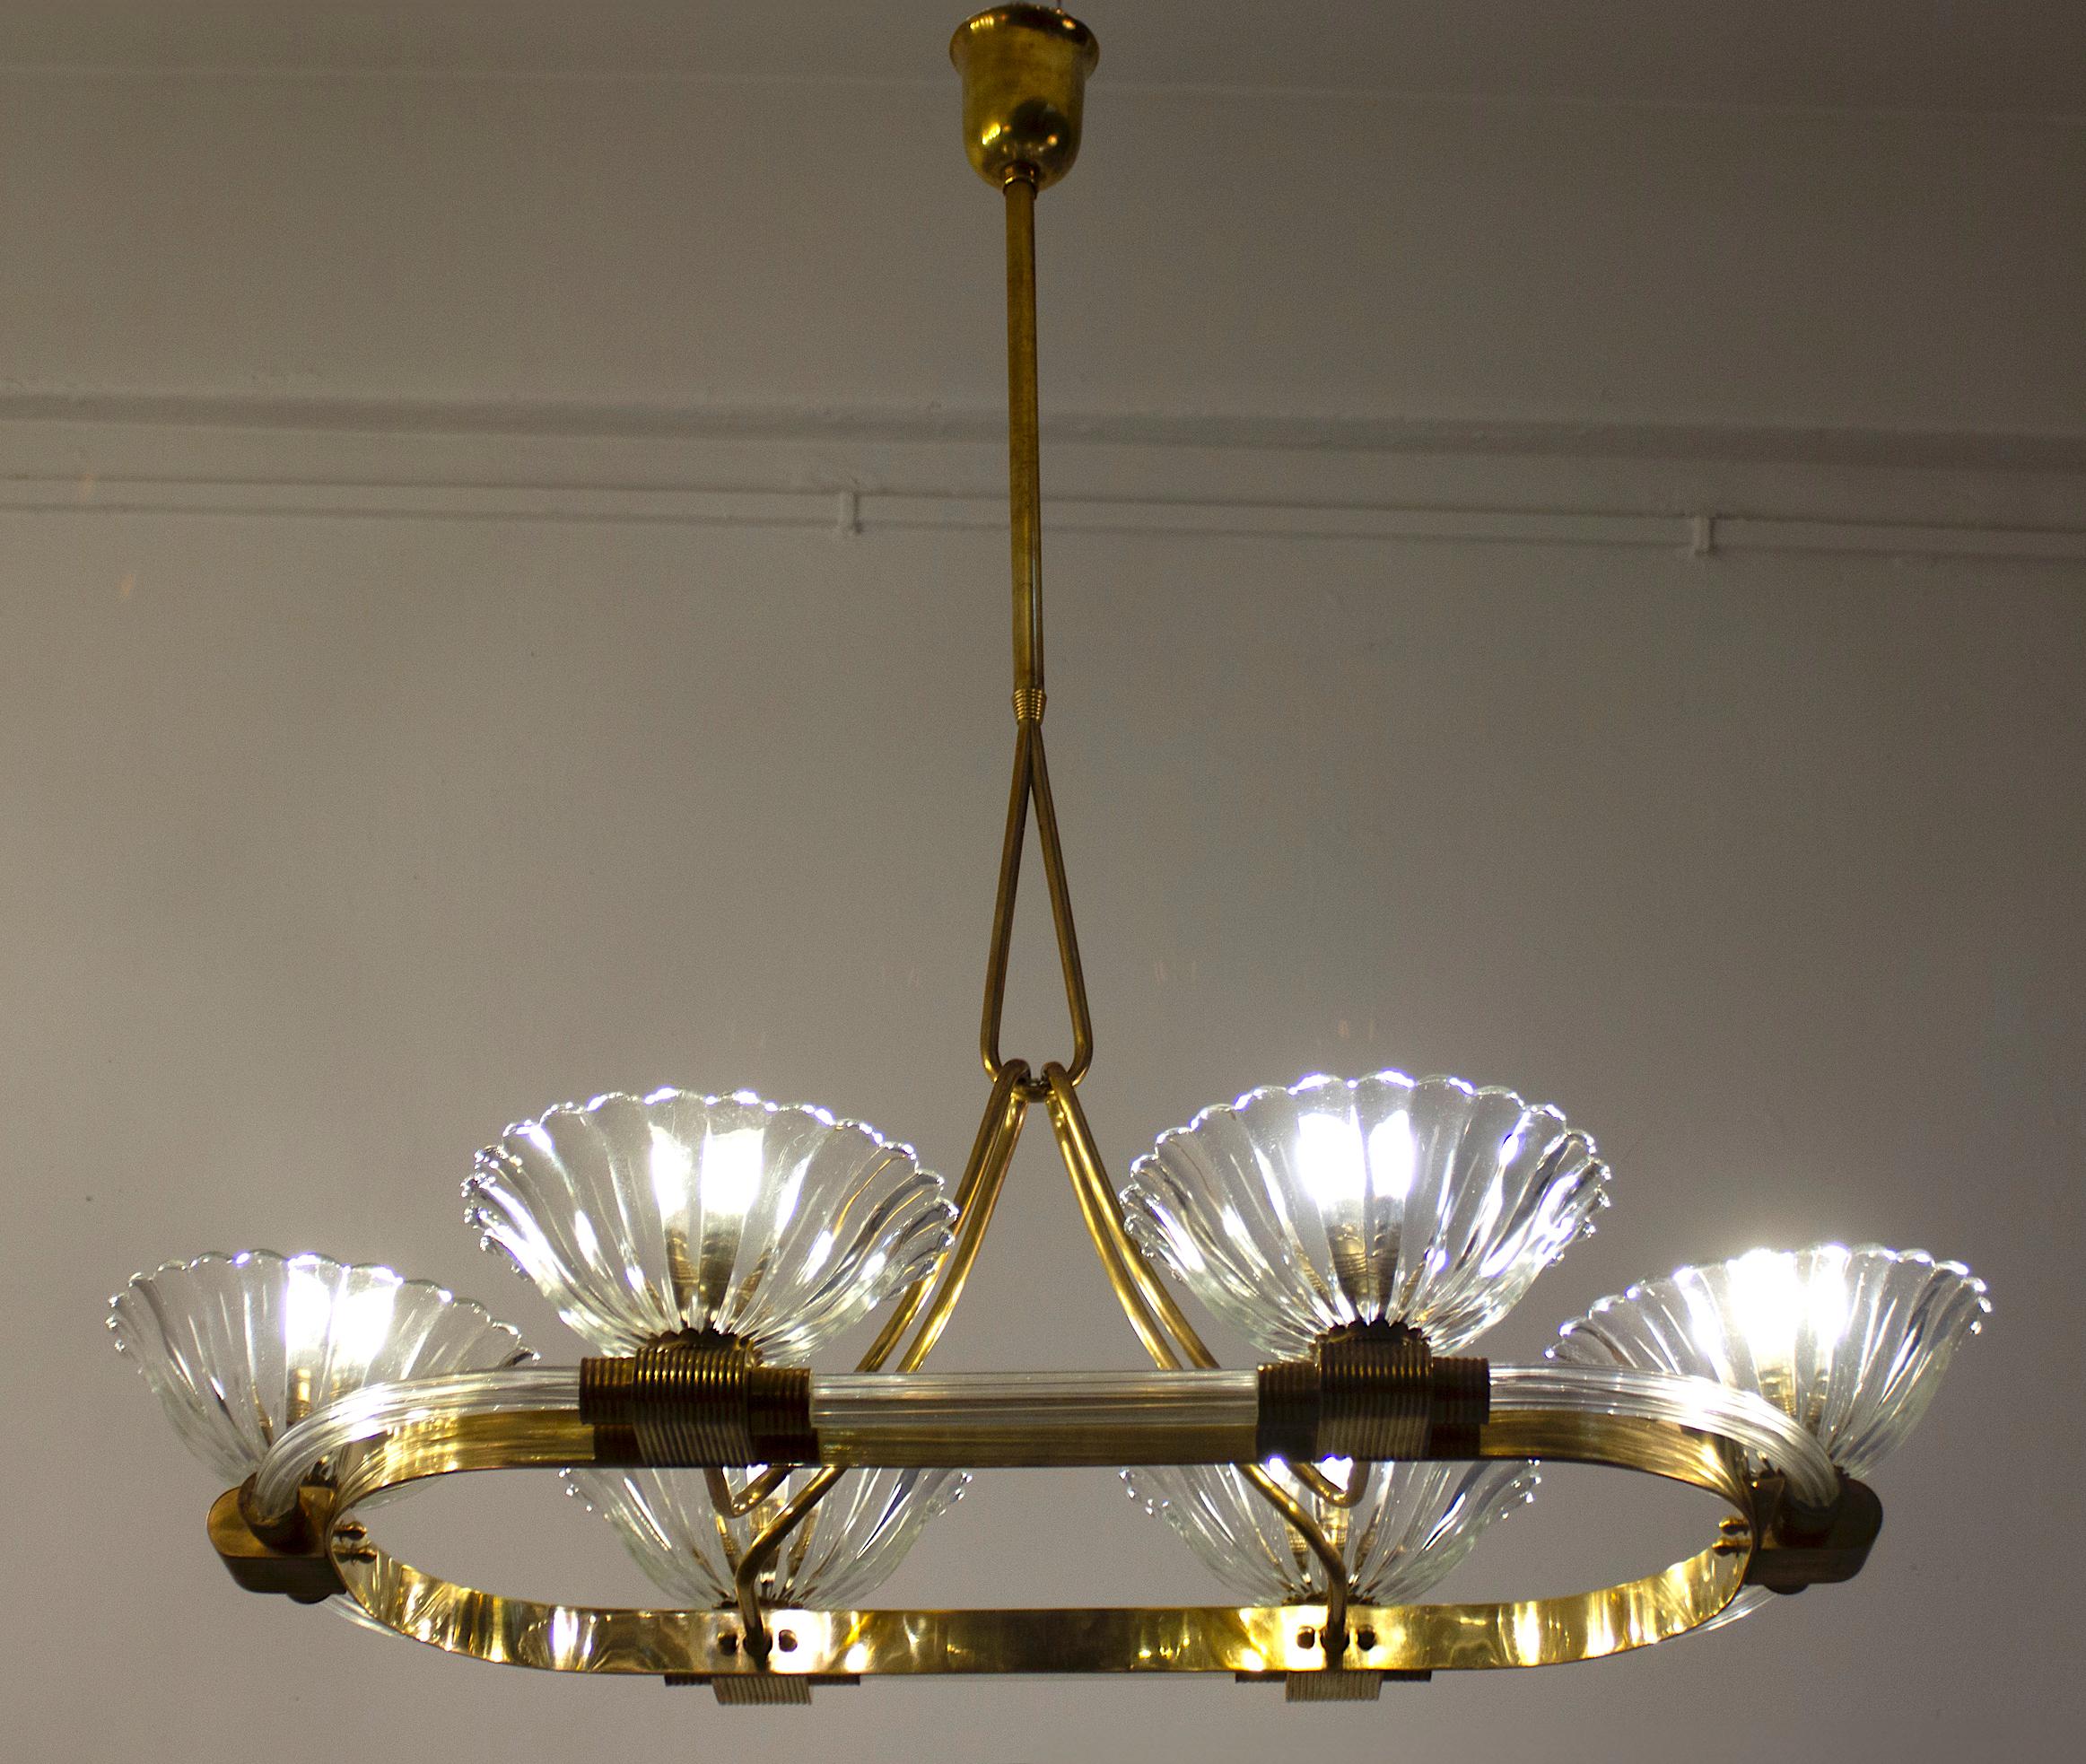 Italian  Art Deco Oval Shape Brass and Murano Glass Chandelier by Ercole Barovier 1940 For Sale